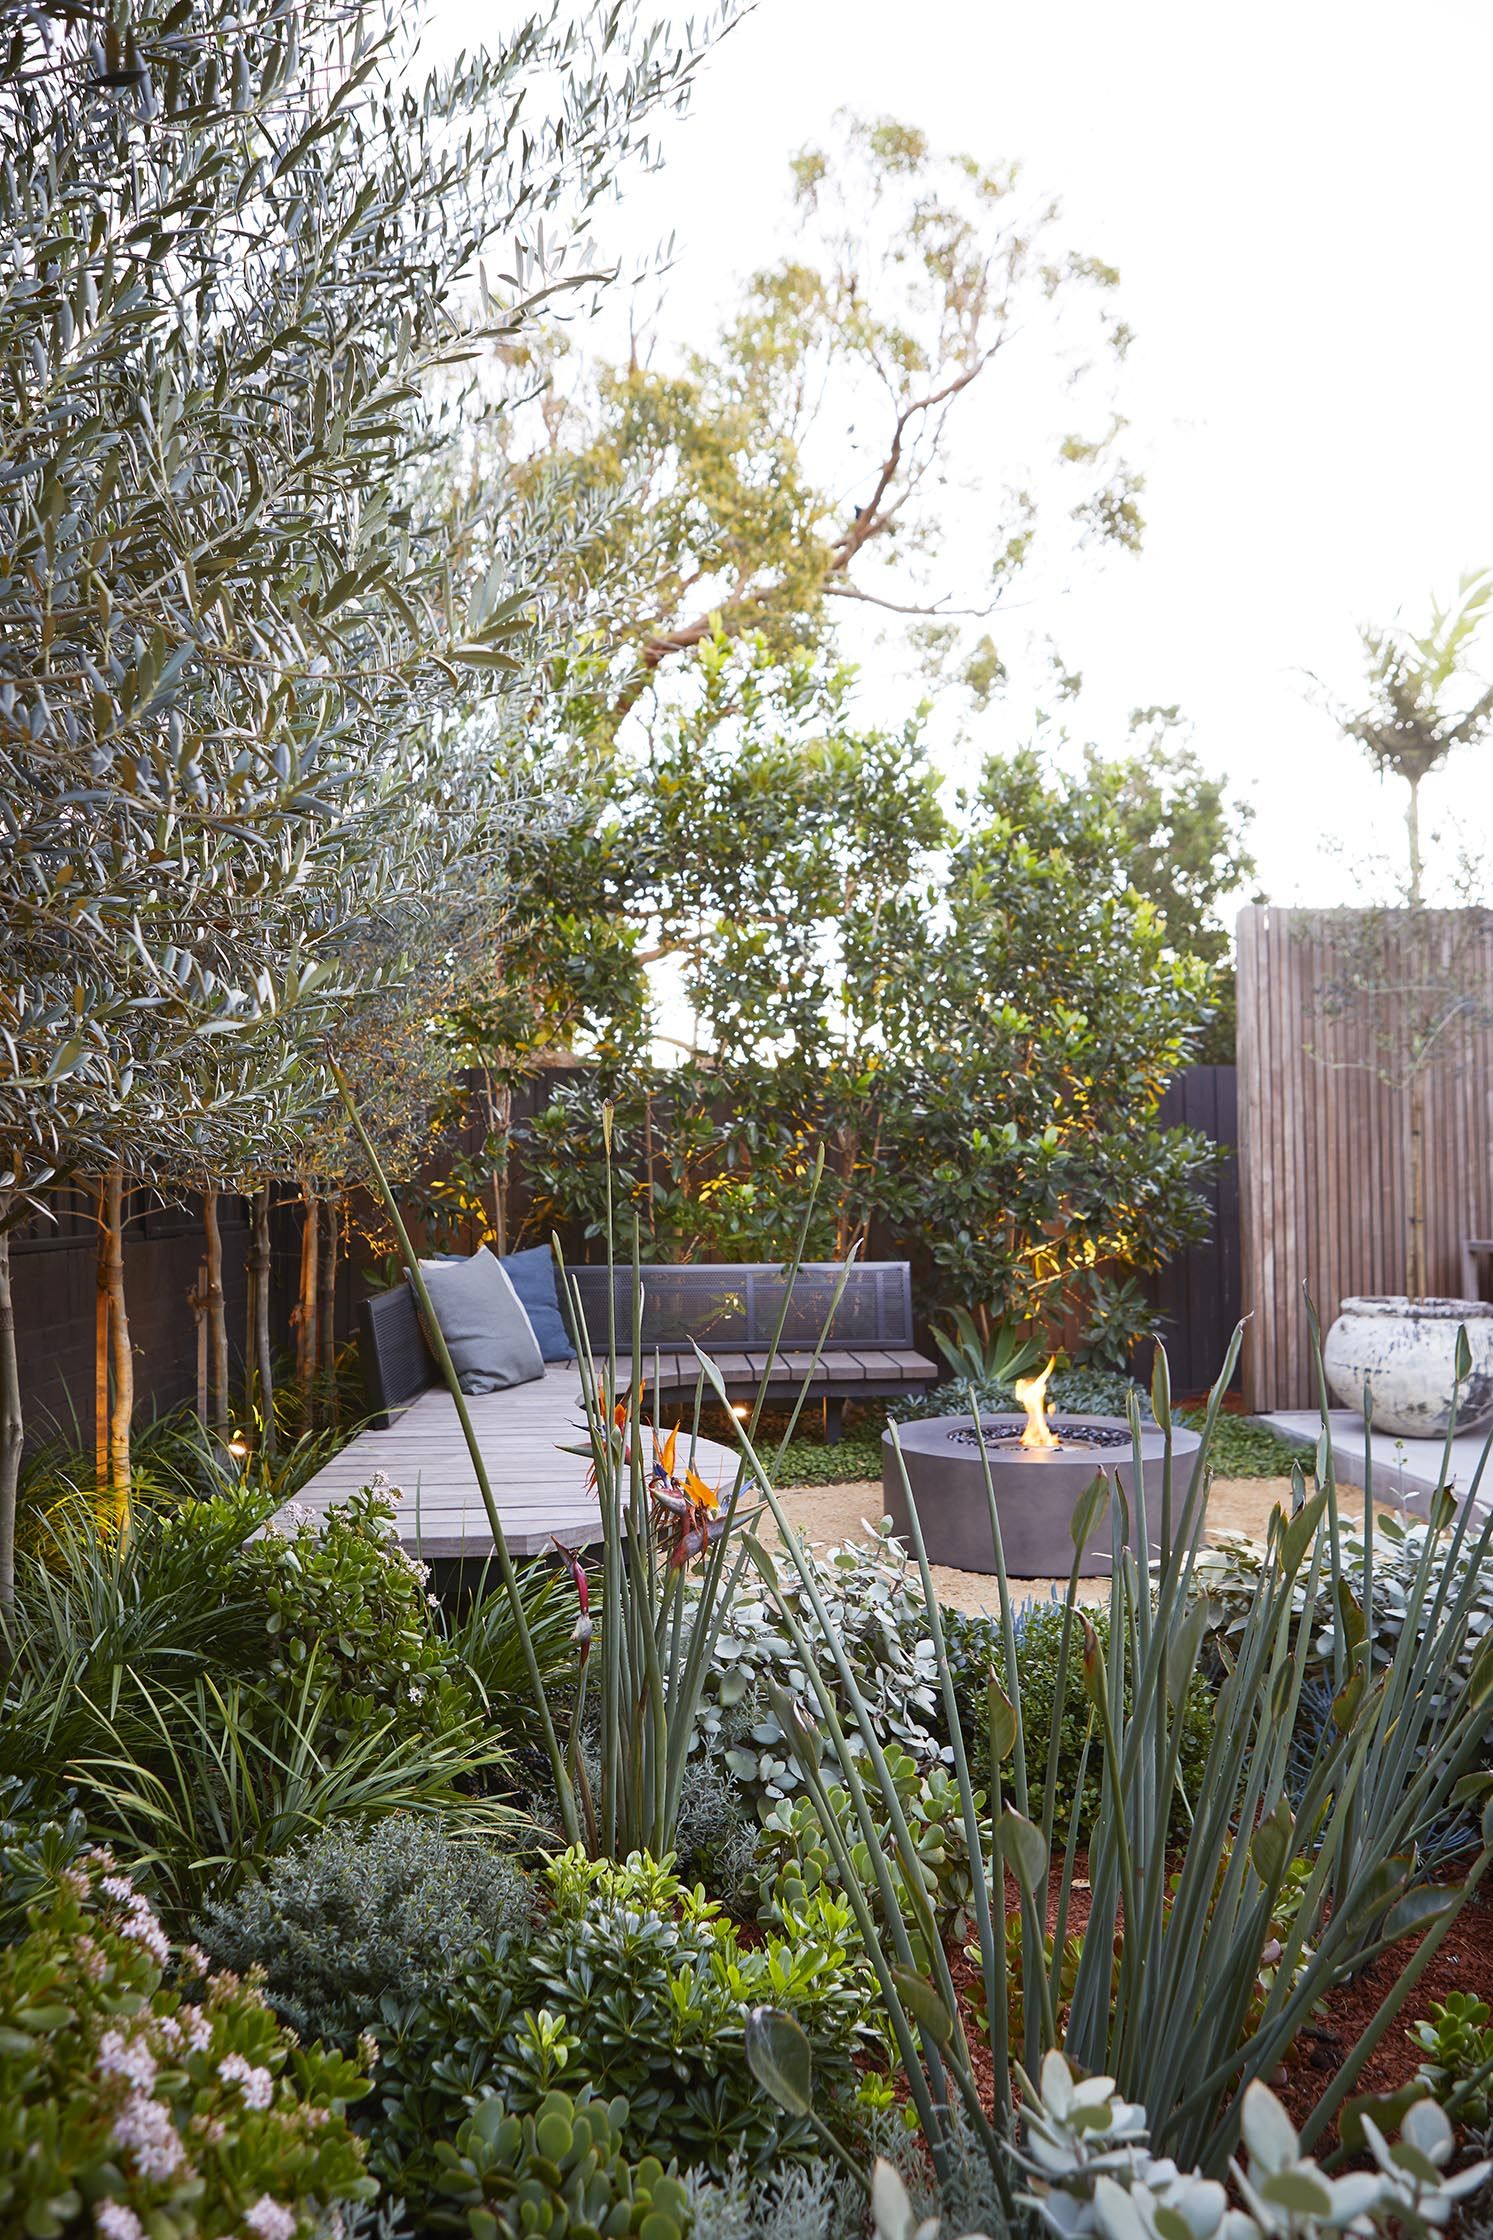 Creating a Stunning Garden Design Landscape for Your Outdoor Oasis